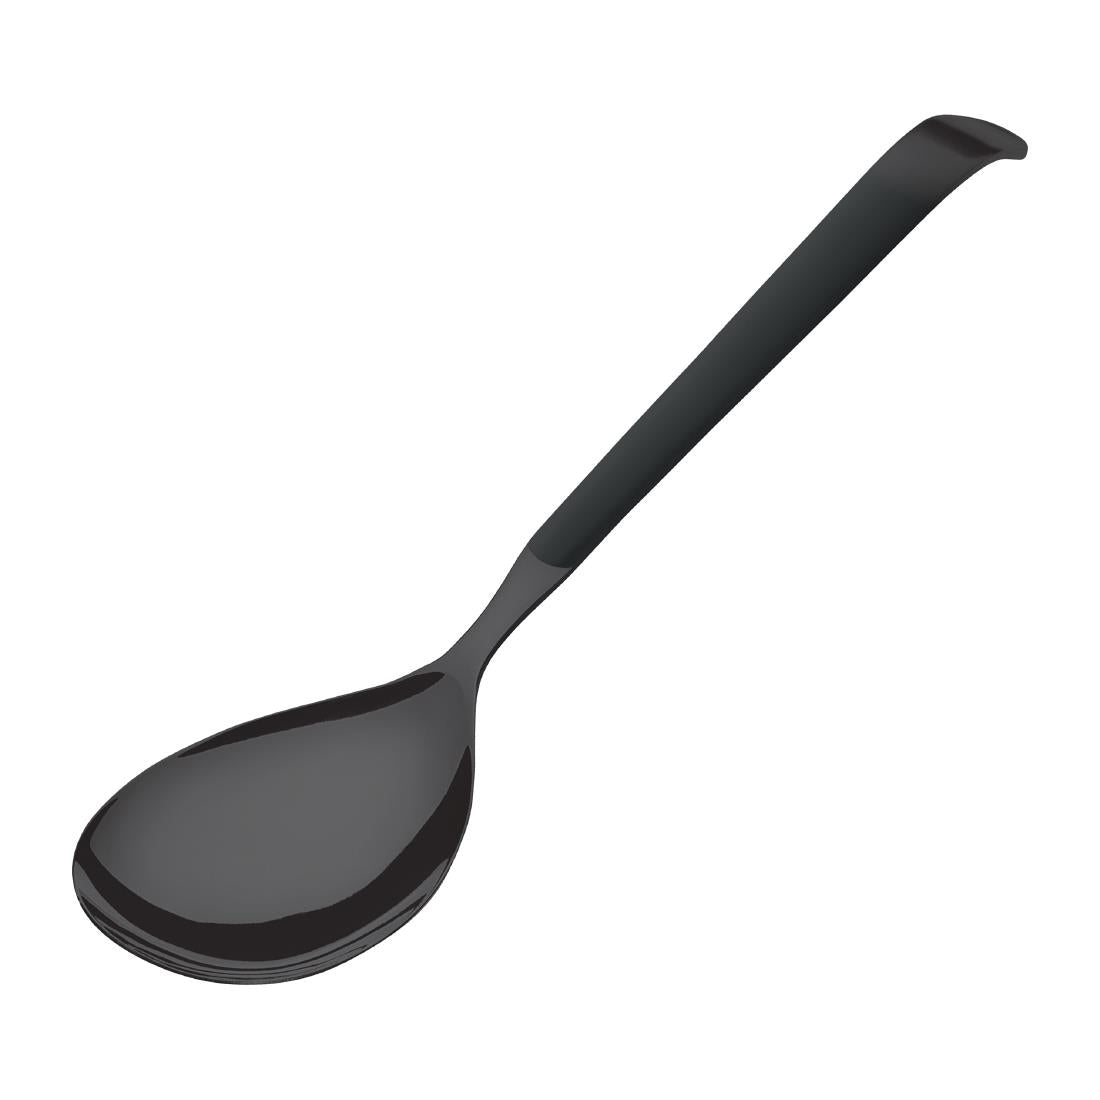 DX665 Amefa Buffet Solid Serving Spoon Black (Pack of 6)